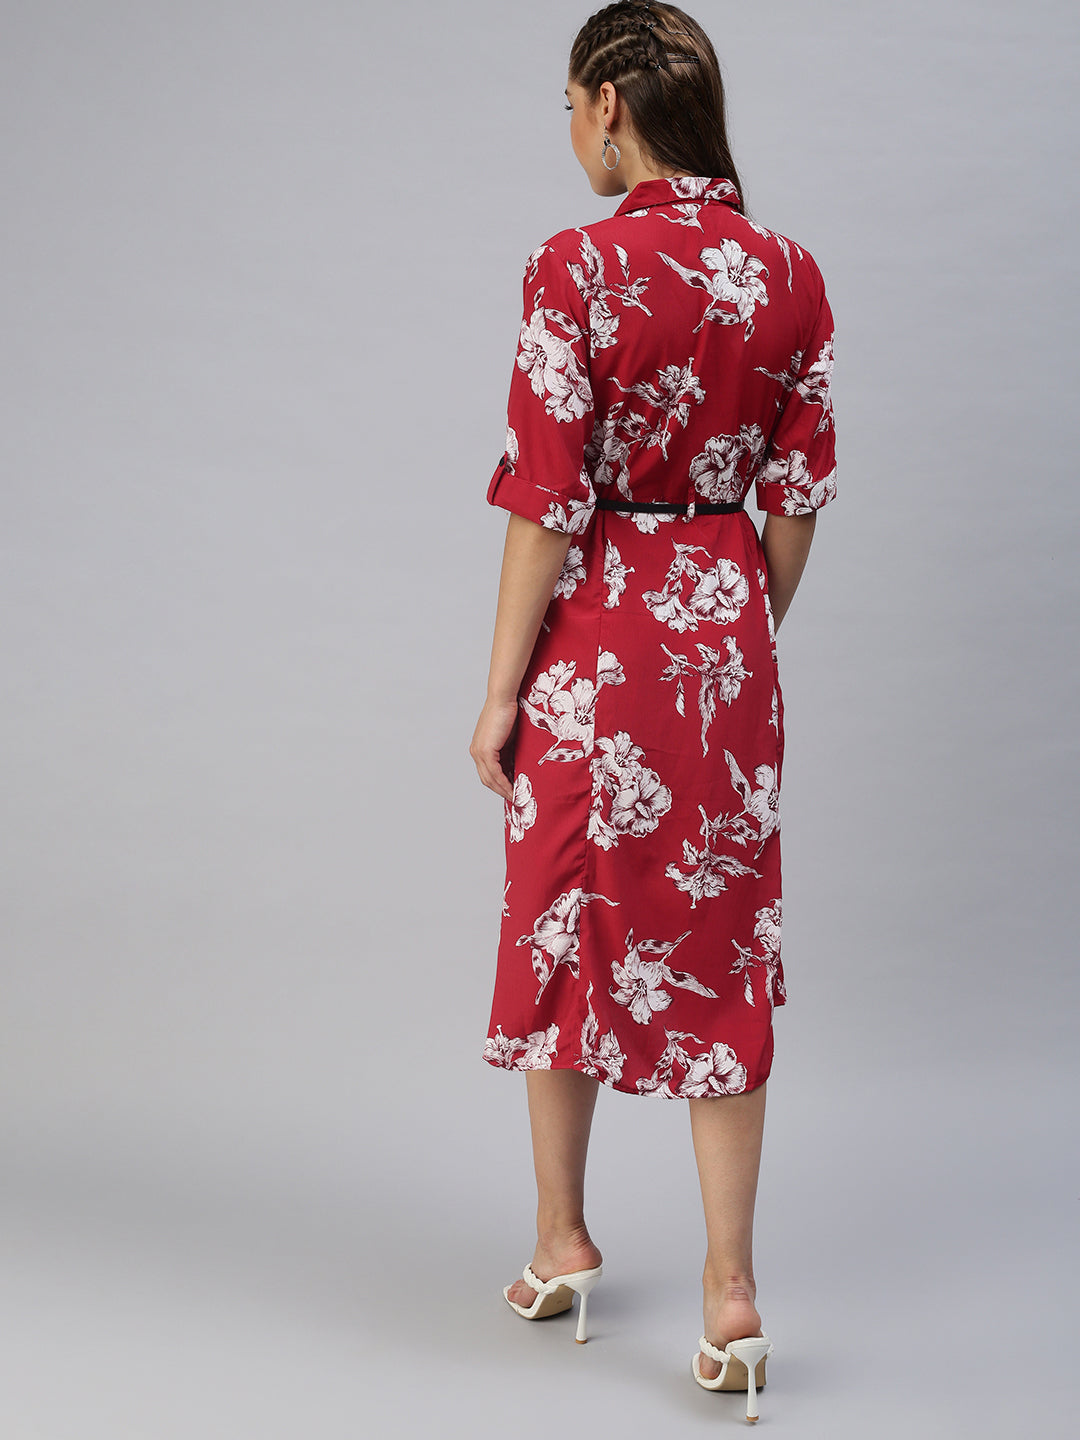 Women Printed Fit and Flare Red Dress